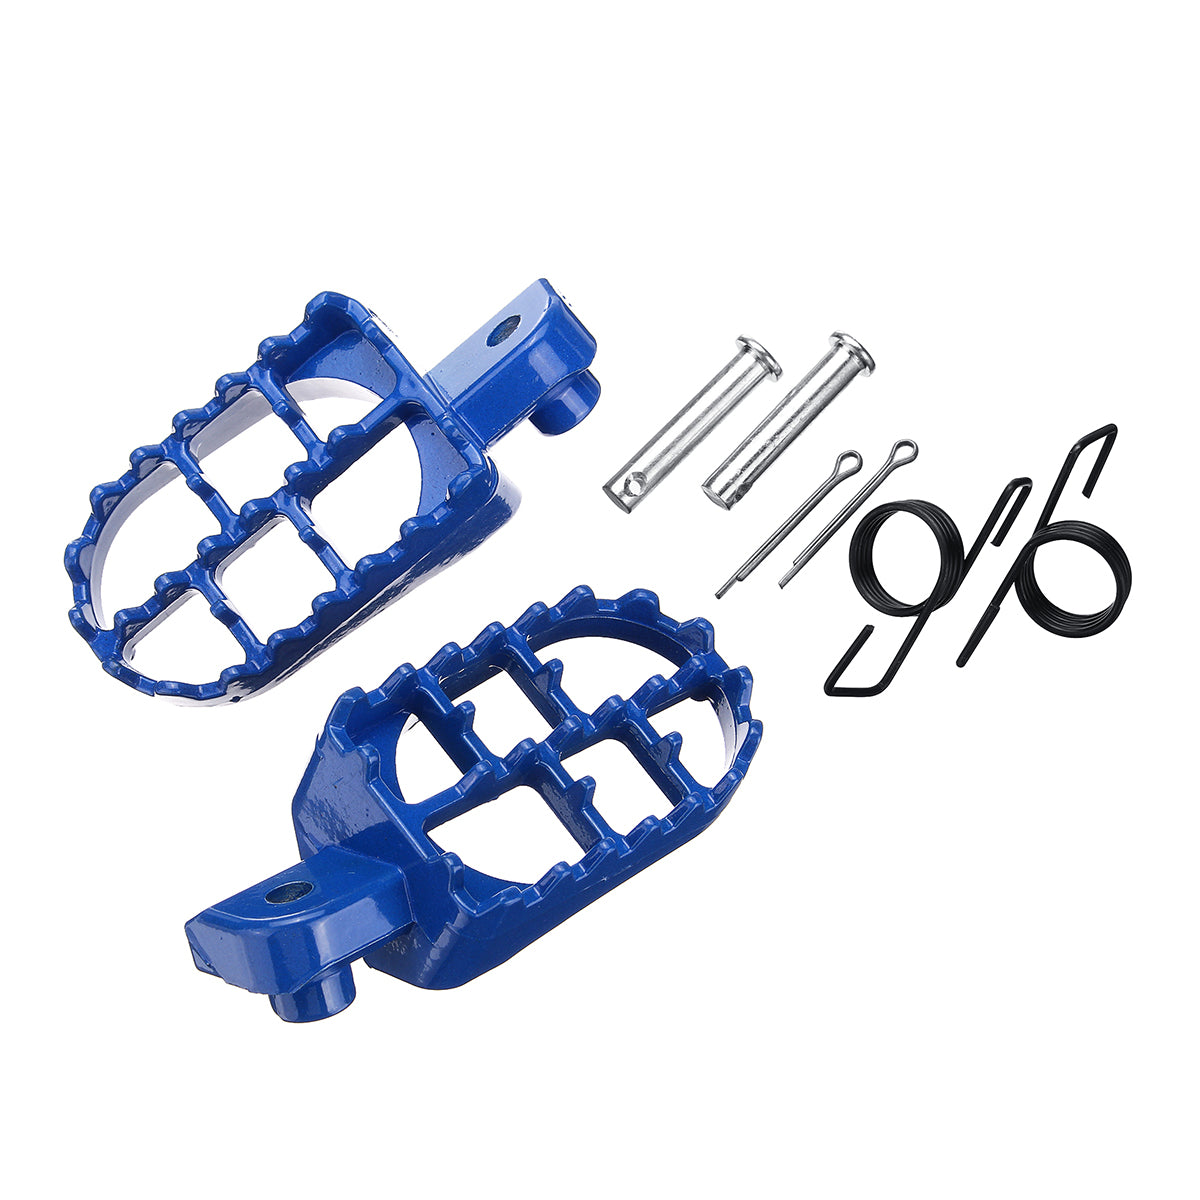 Midnight Blue Wide Foot Pegs Footrests For Yamaha PW50 PW80 TW200 Honda XR/CRF Pit Dirt Bike